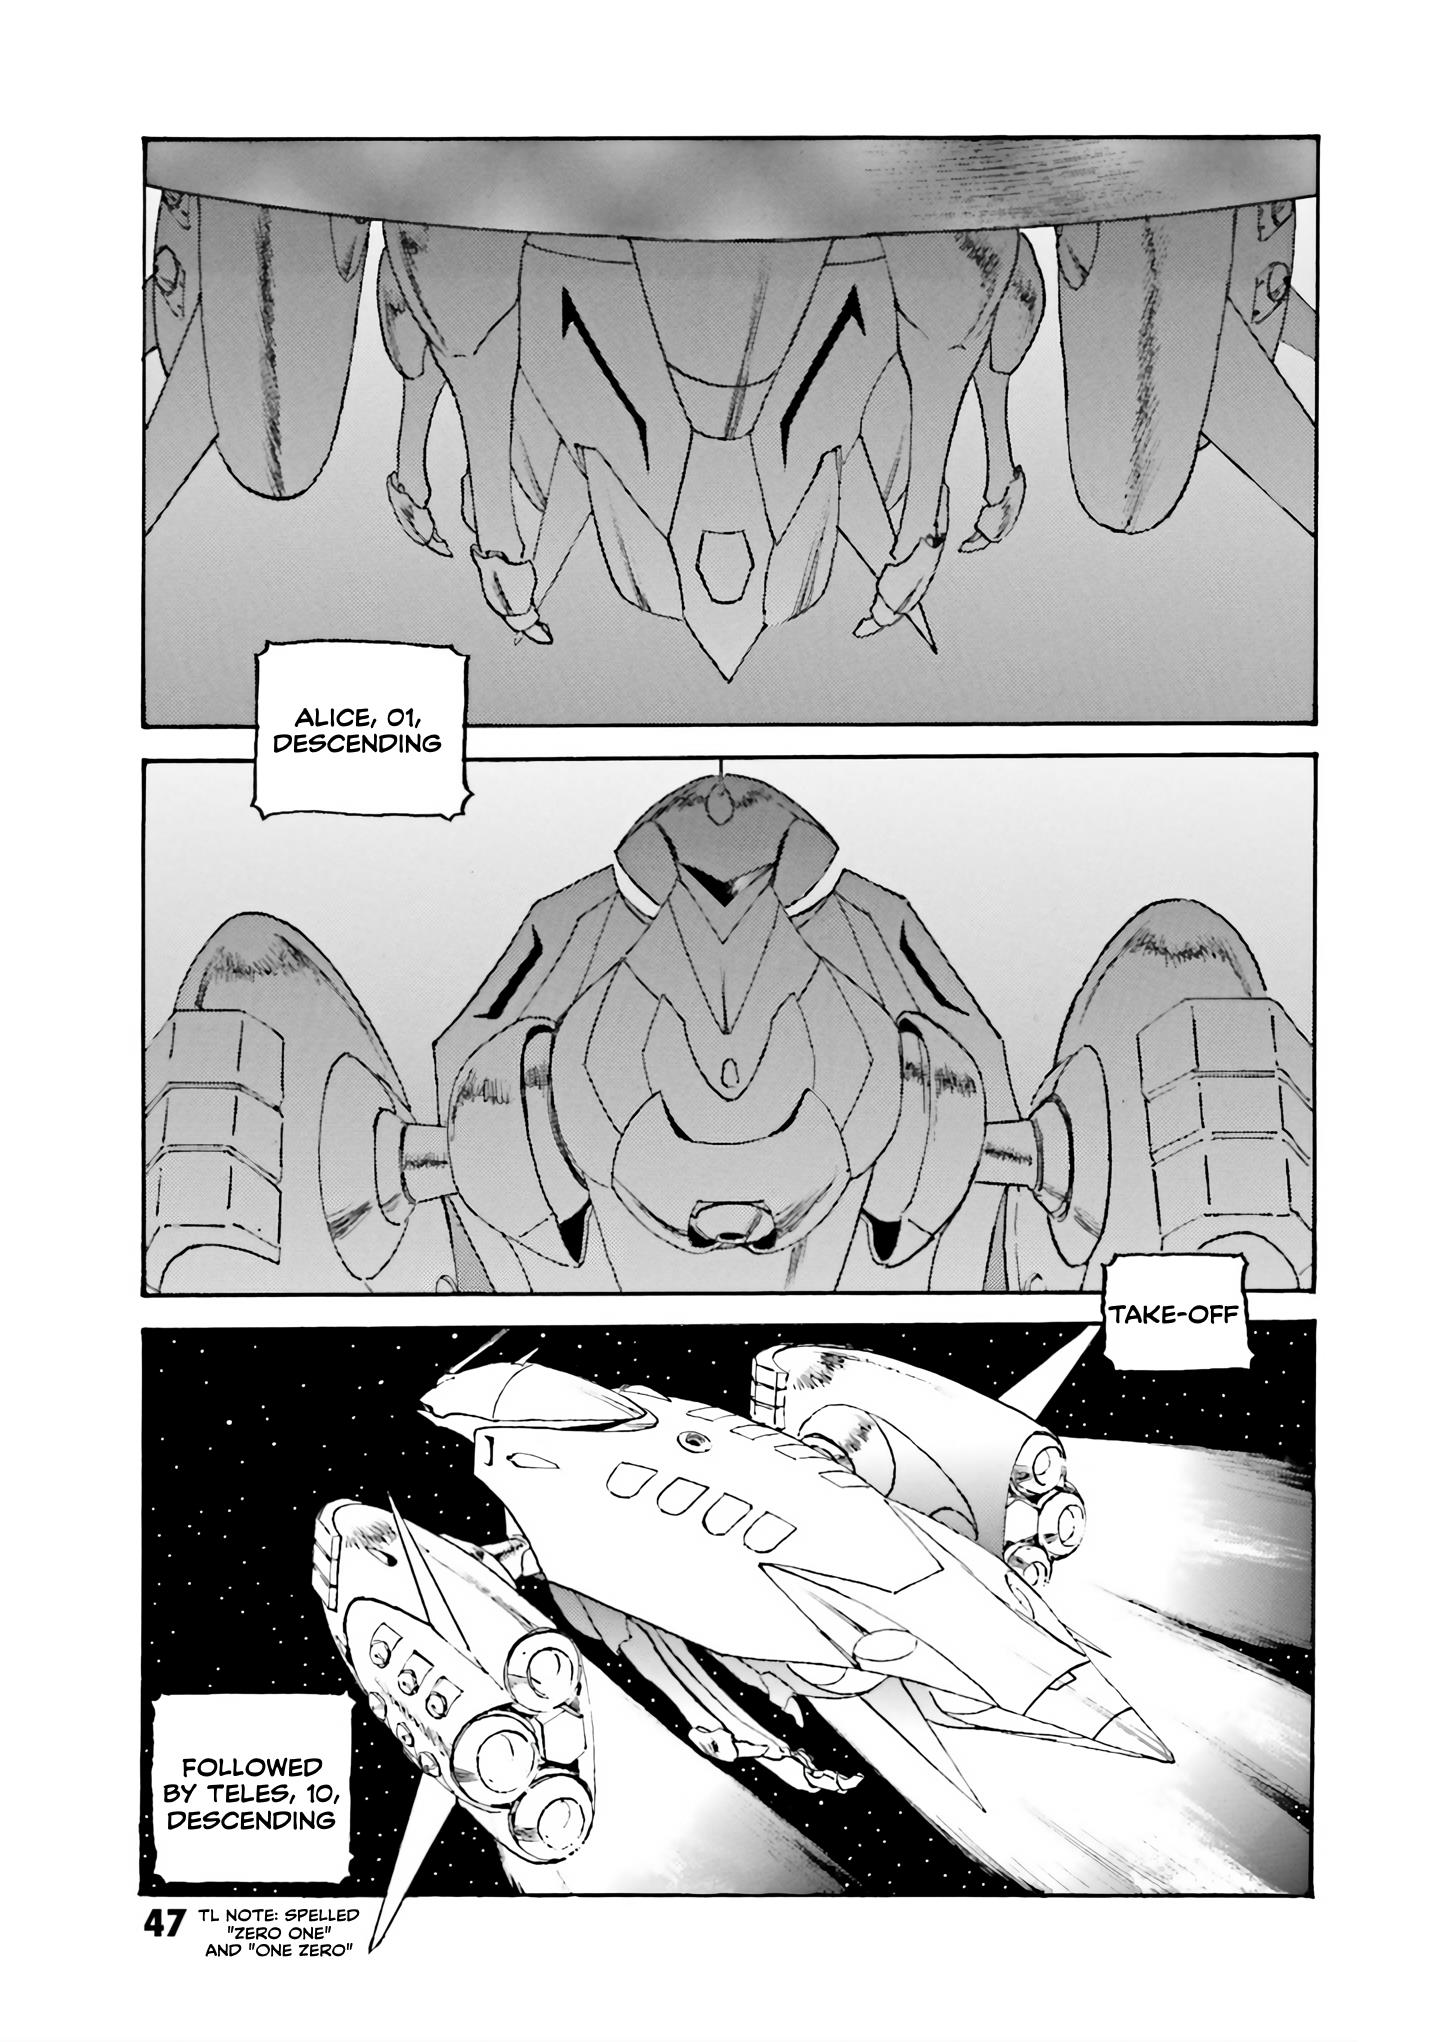 Mobile Suit Gundam: The Revival Of Zeon - Remnant One - Page 4